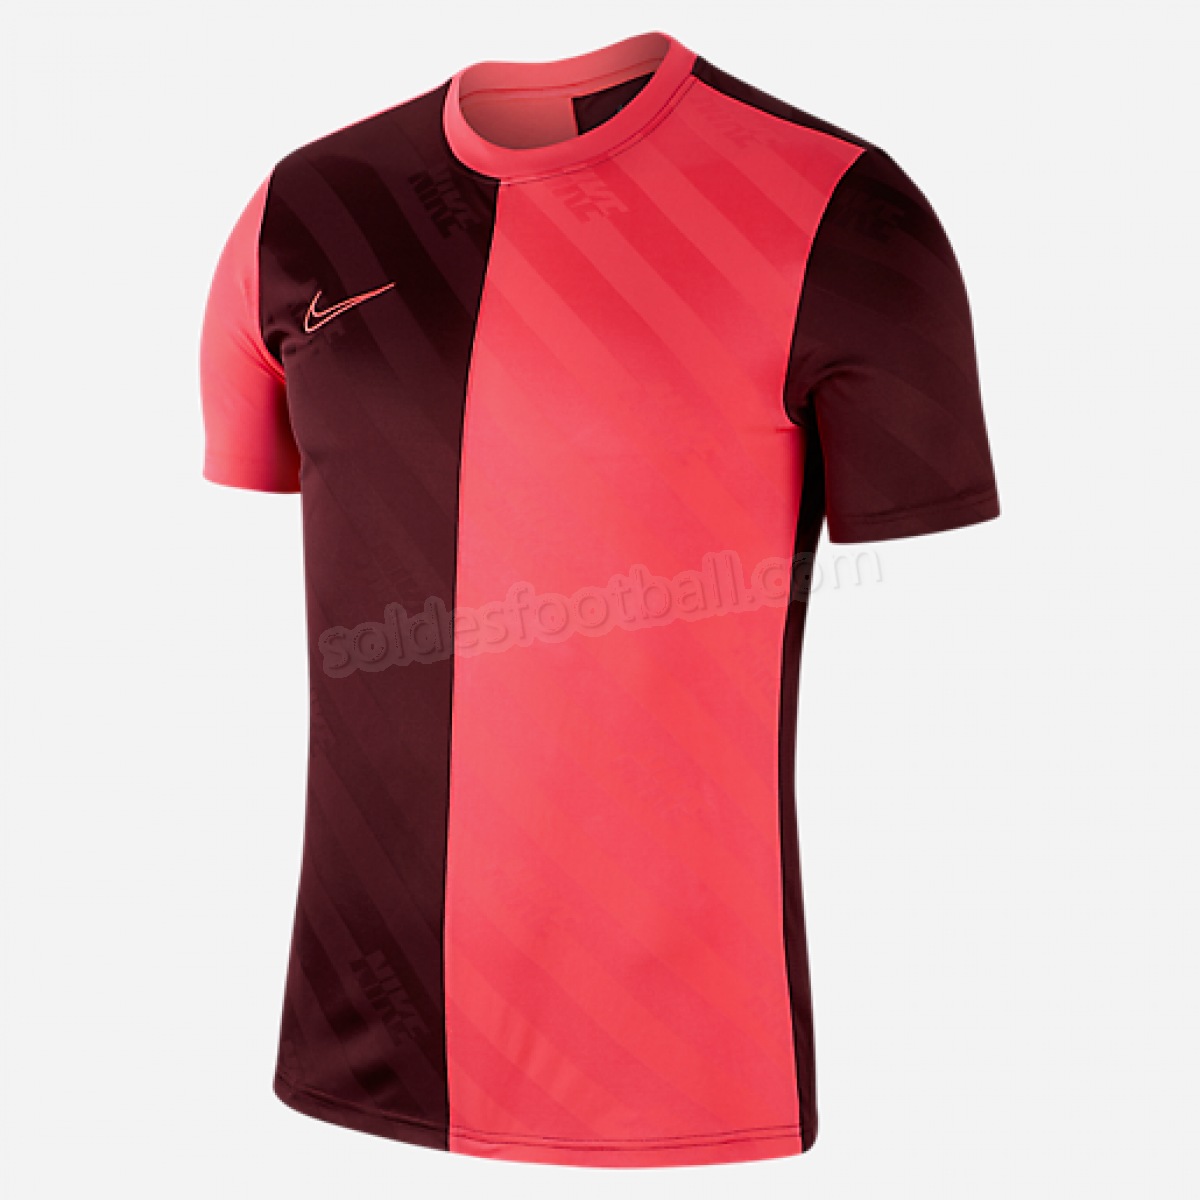 Maillot de football adulte M Nk Dry Acdmy Top Ss Aop-NIKE en solde - Maillot de football adulte M Nk Dry Acdmy Top Ss Aop-NIKE en solde